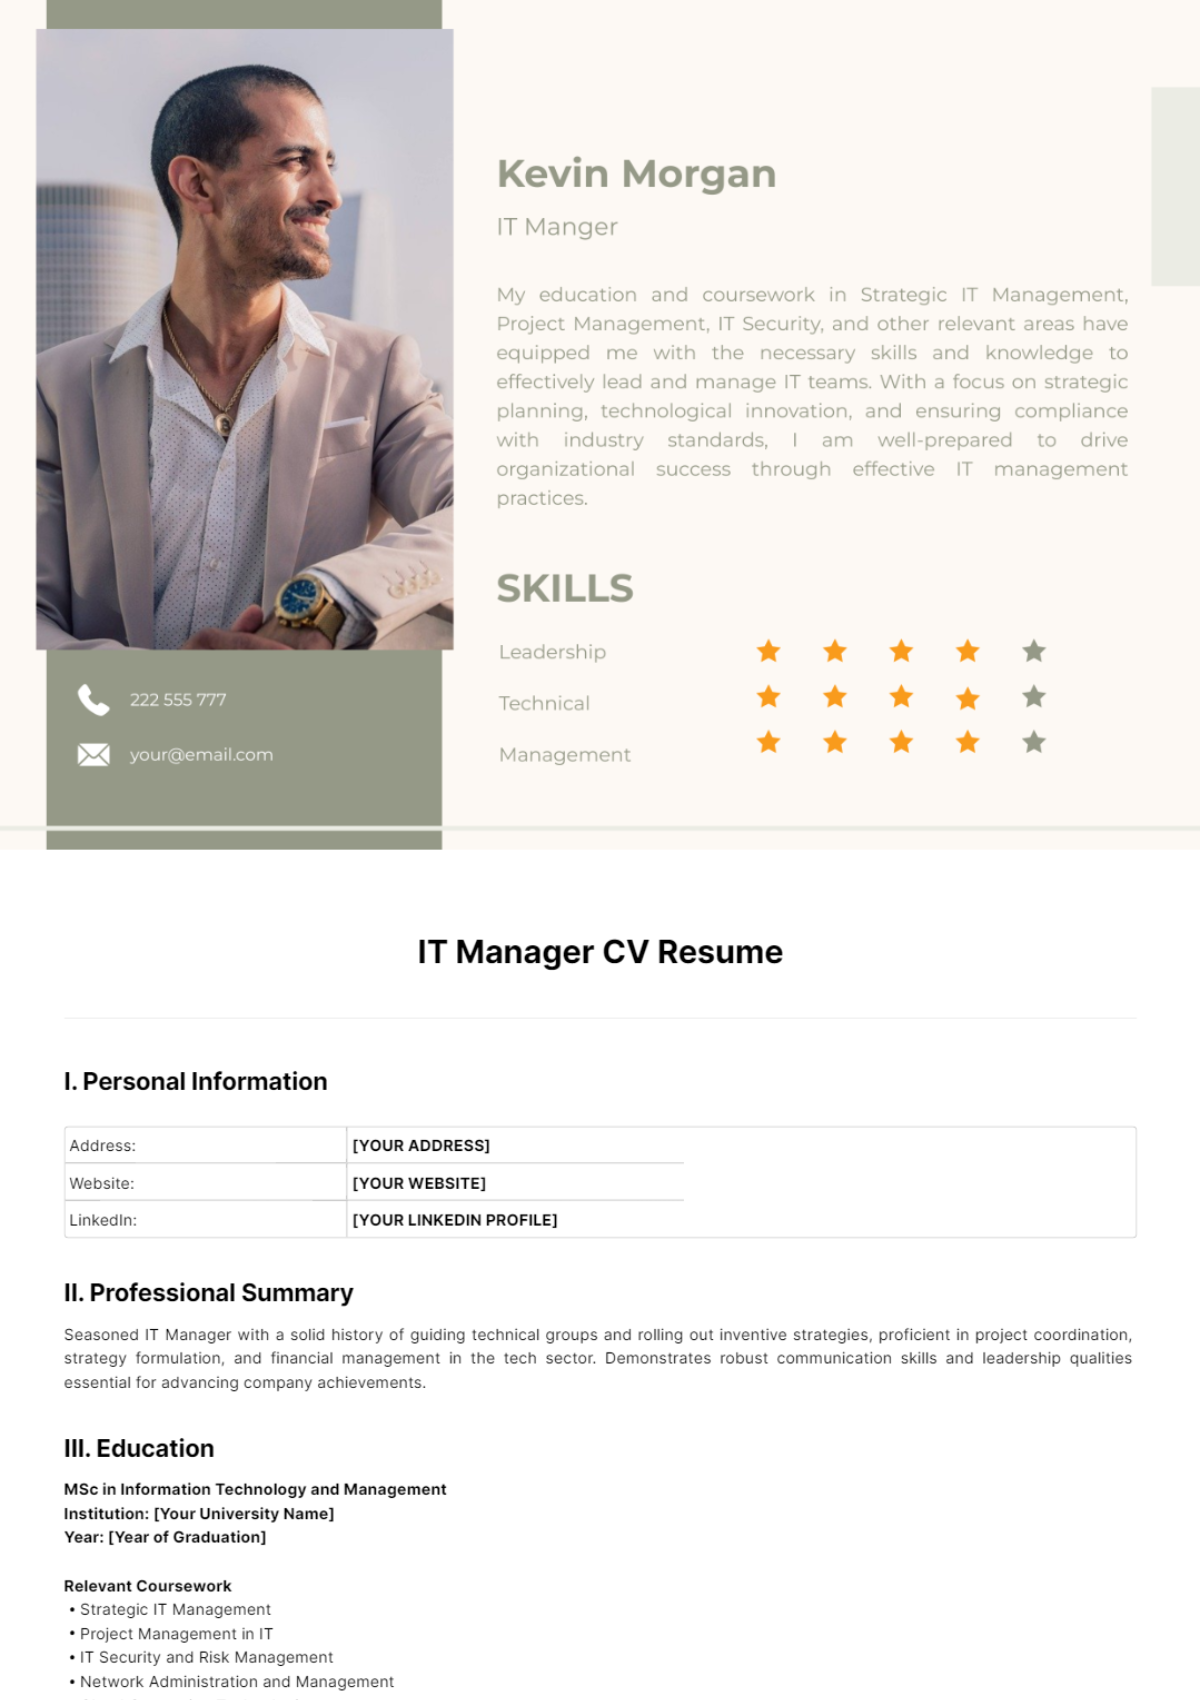 IT Manager CV Resume Template